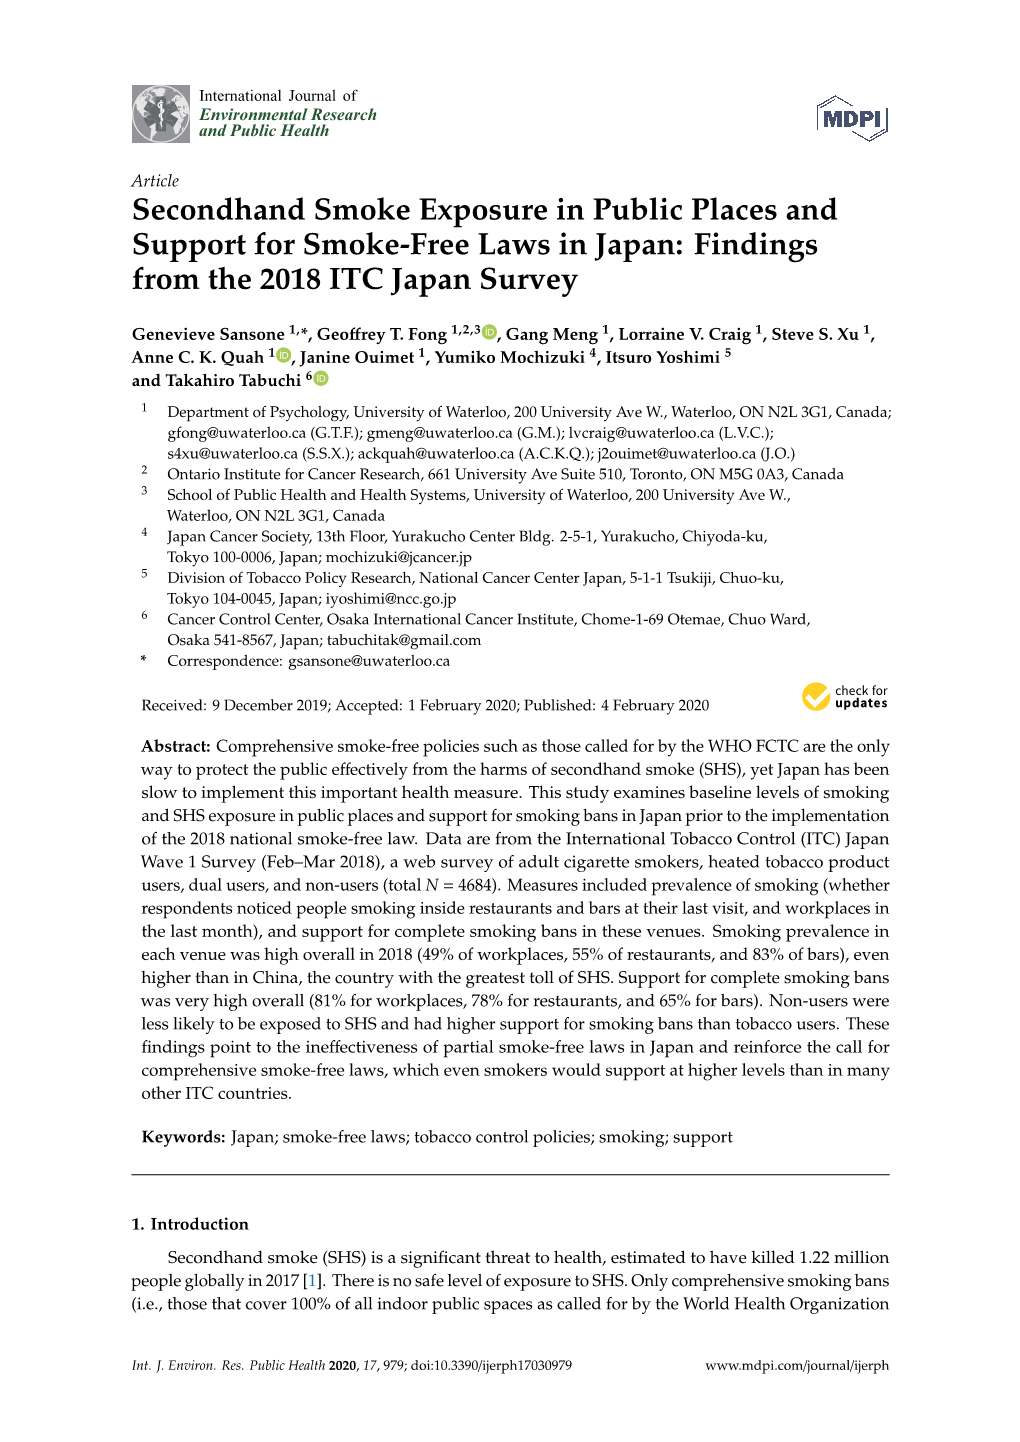 Secondhand Smoke Exposure in Public Places and Support for Smoke-Free Laws in Japan: Findings from the 2018 ITC Japan Survey